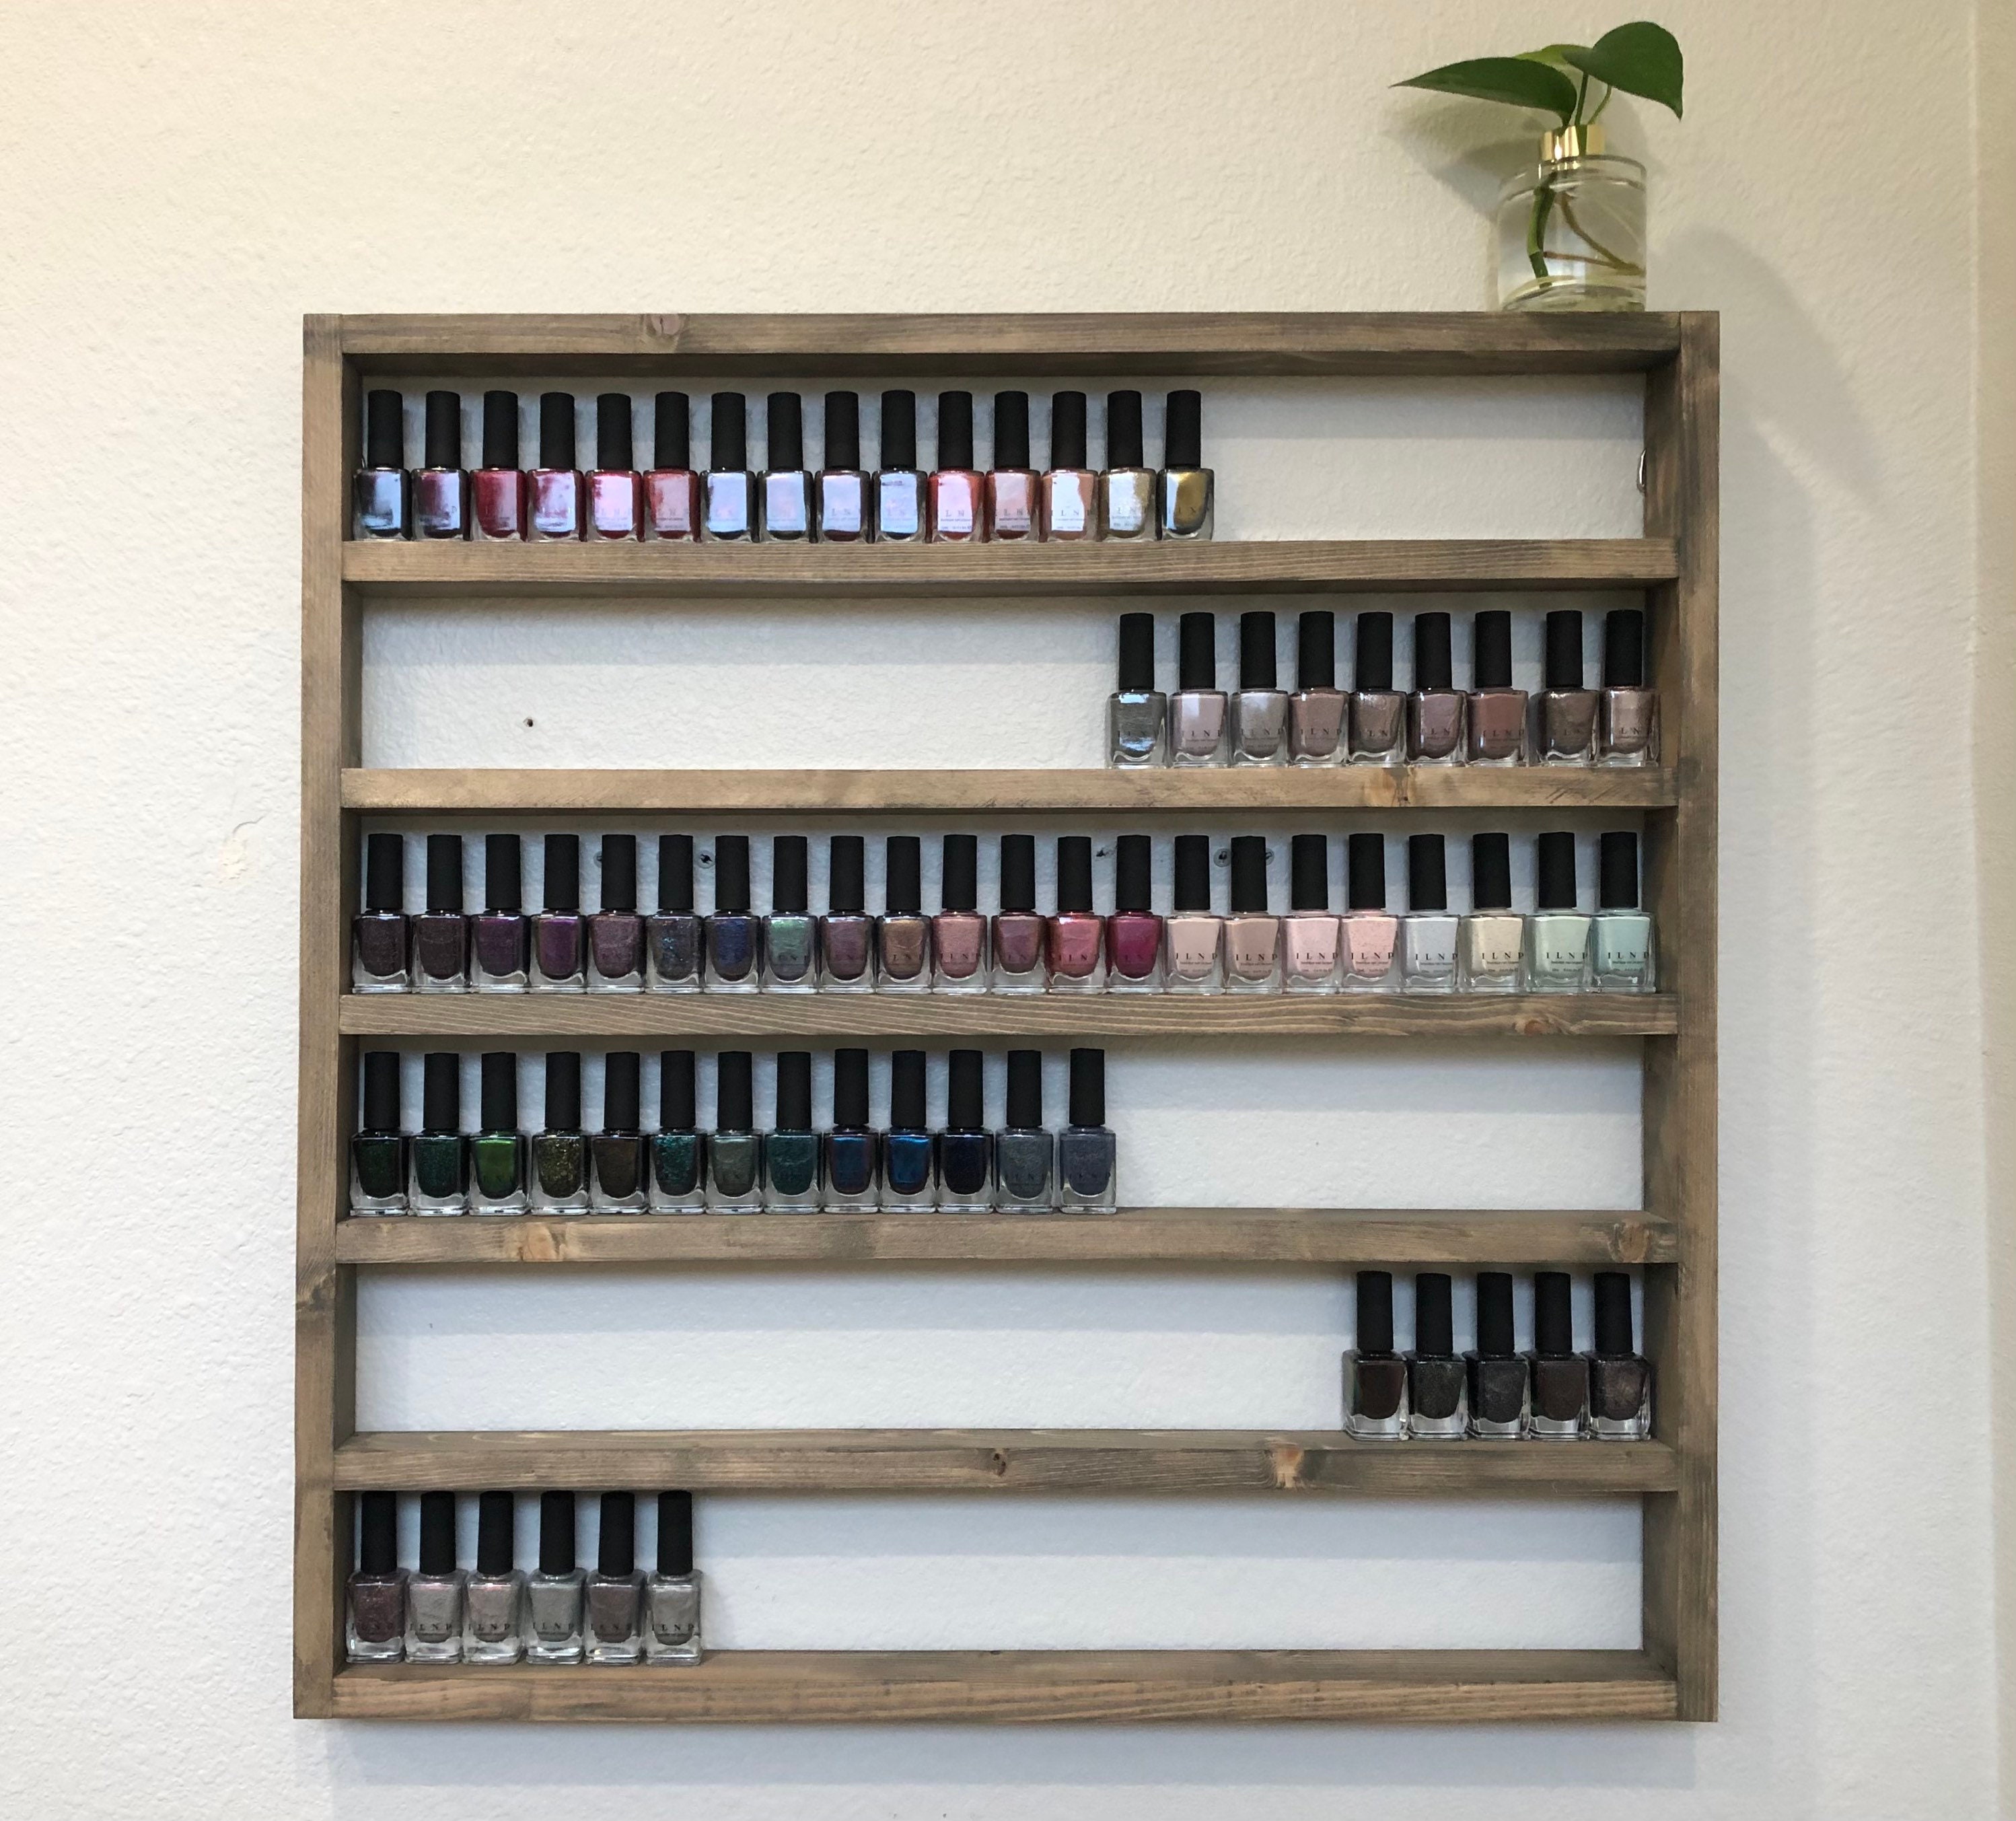 J JACKCUBE DESIGN Rustic Wood Nail Polish Organizer with 6 Tier shelves  Wall Mount Display Rack Makeup Bottles Holder Storage for Nail Salon  Bedroom Dress room - MK528A : Amazon.in: Beauty